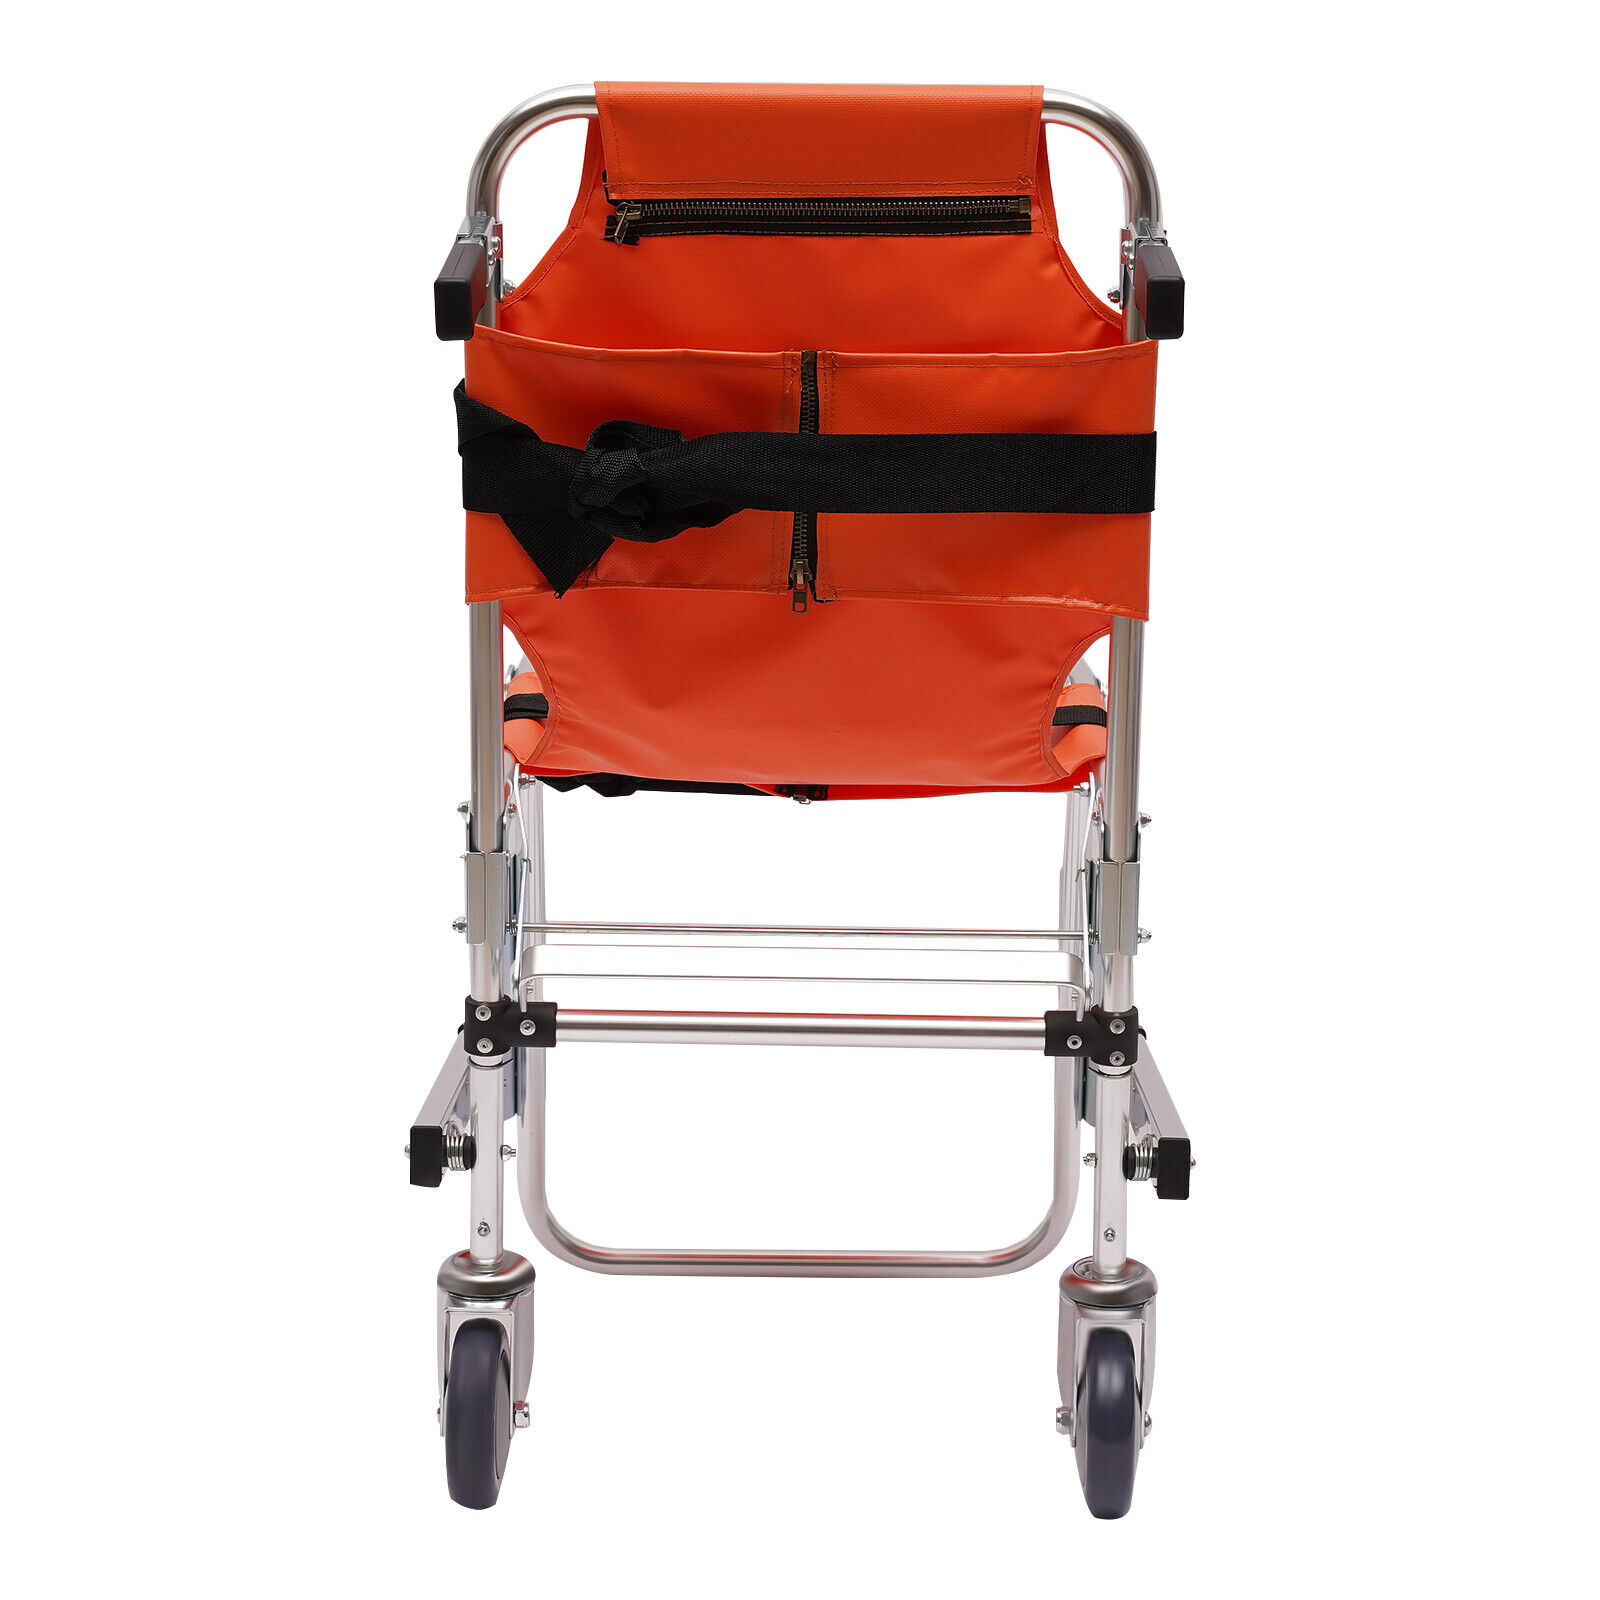 EMS Stair Chair Medical Emergency Evacuation Lifting Climbing Wheelchair 2 wheel Unbranded Does Not Apply - фотография #6